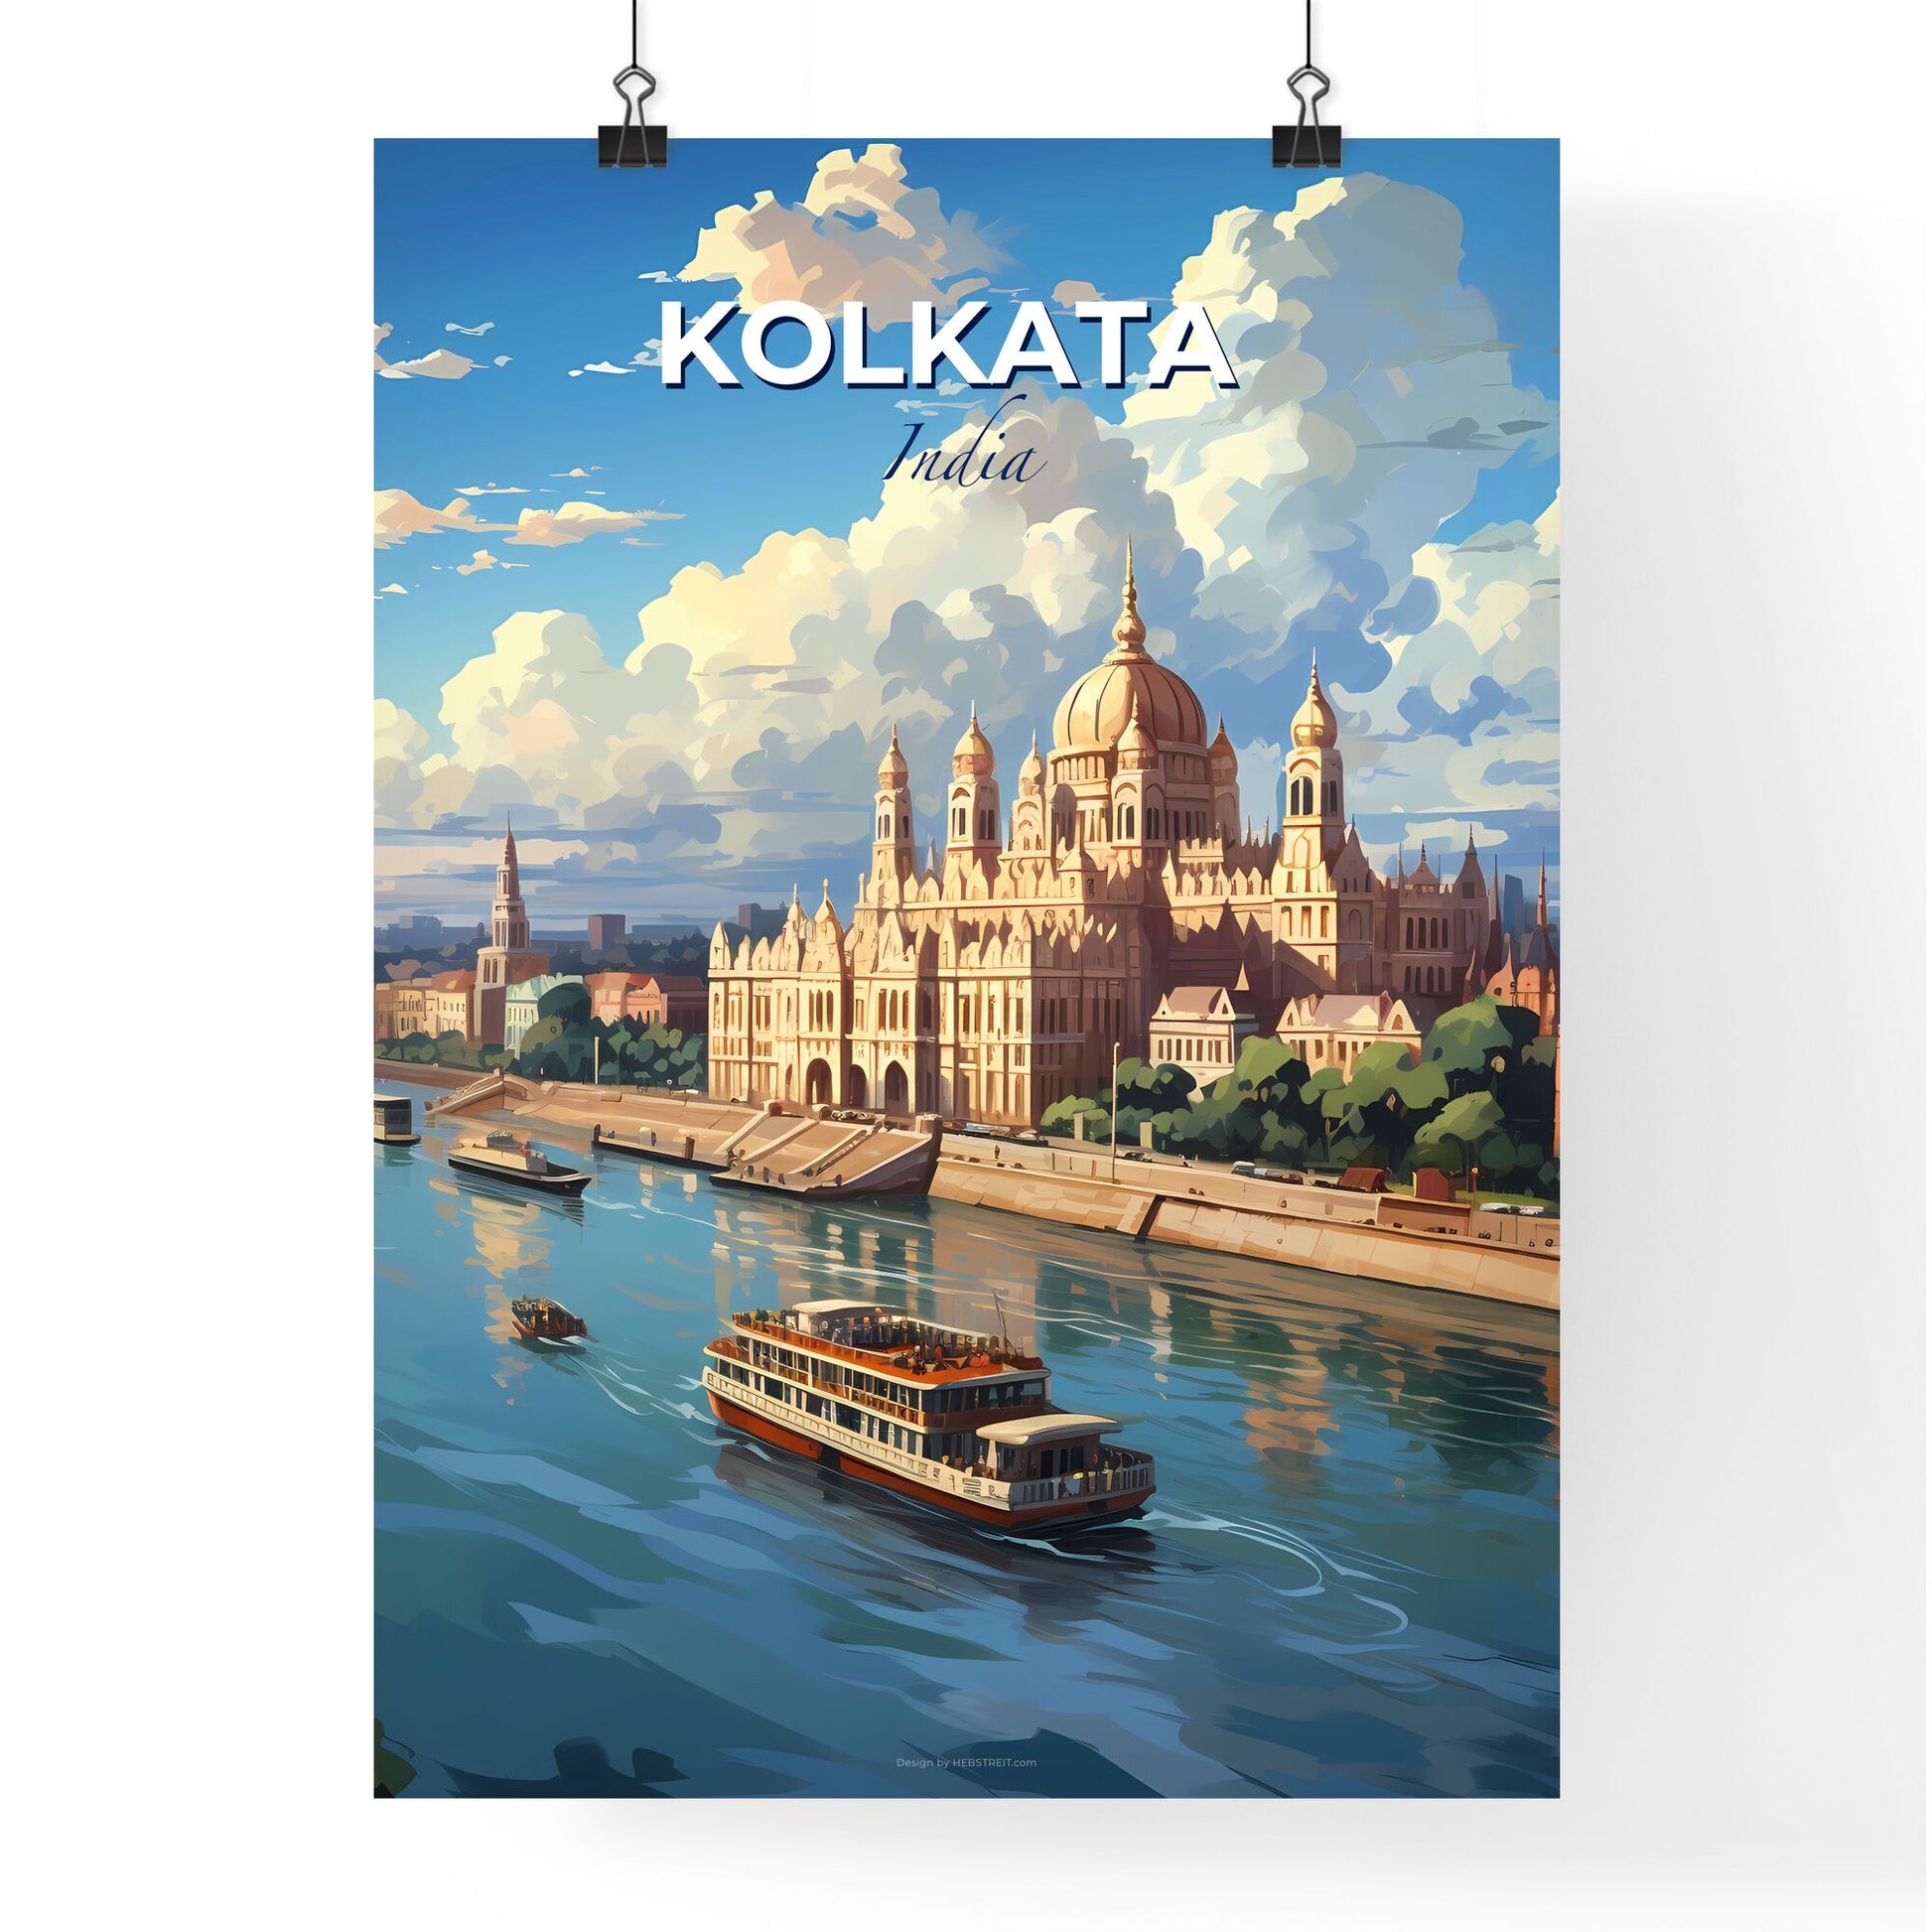 Kolkata India Skyline with Boats and Castle - Vibrant Artistic Painting Default Title